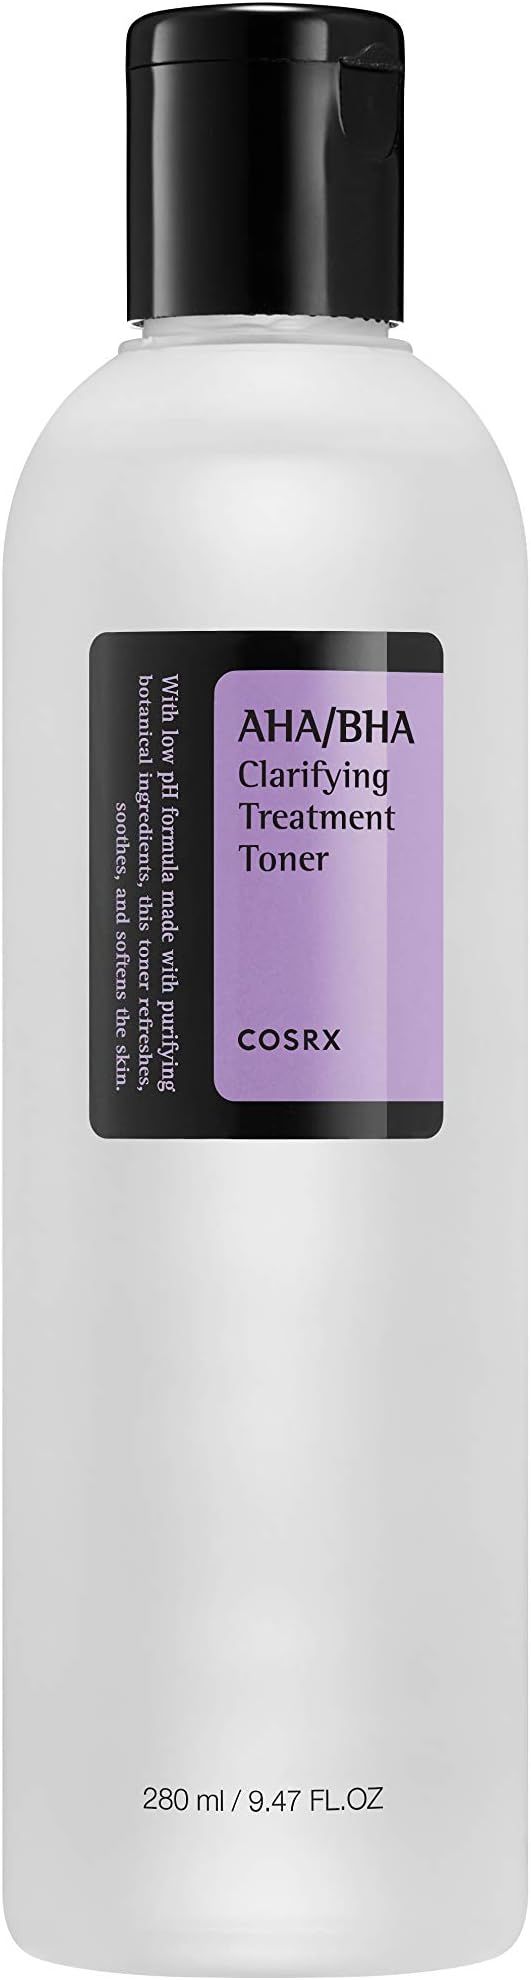 COSRX AHA/BHA Treatment Toner, Facial Exfoliating Spray for Whiteheads, Pores, and Uneven Skin, 9... | Amazon (US)